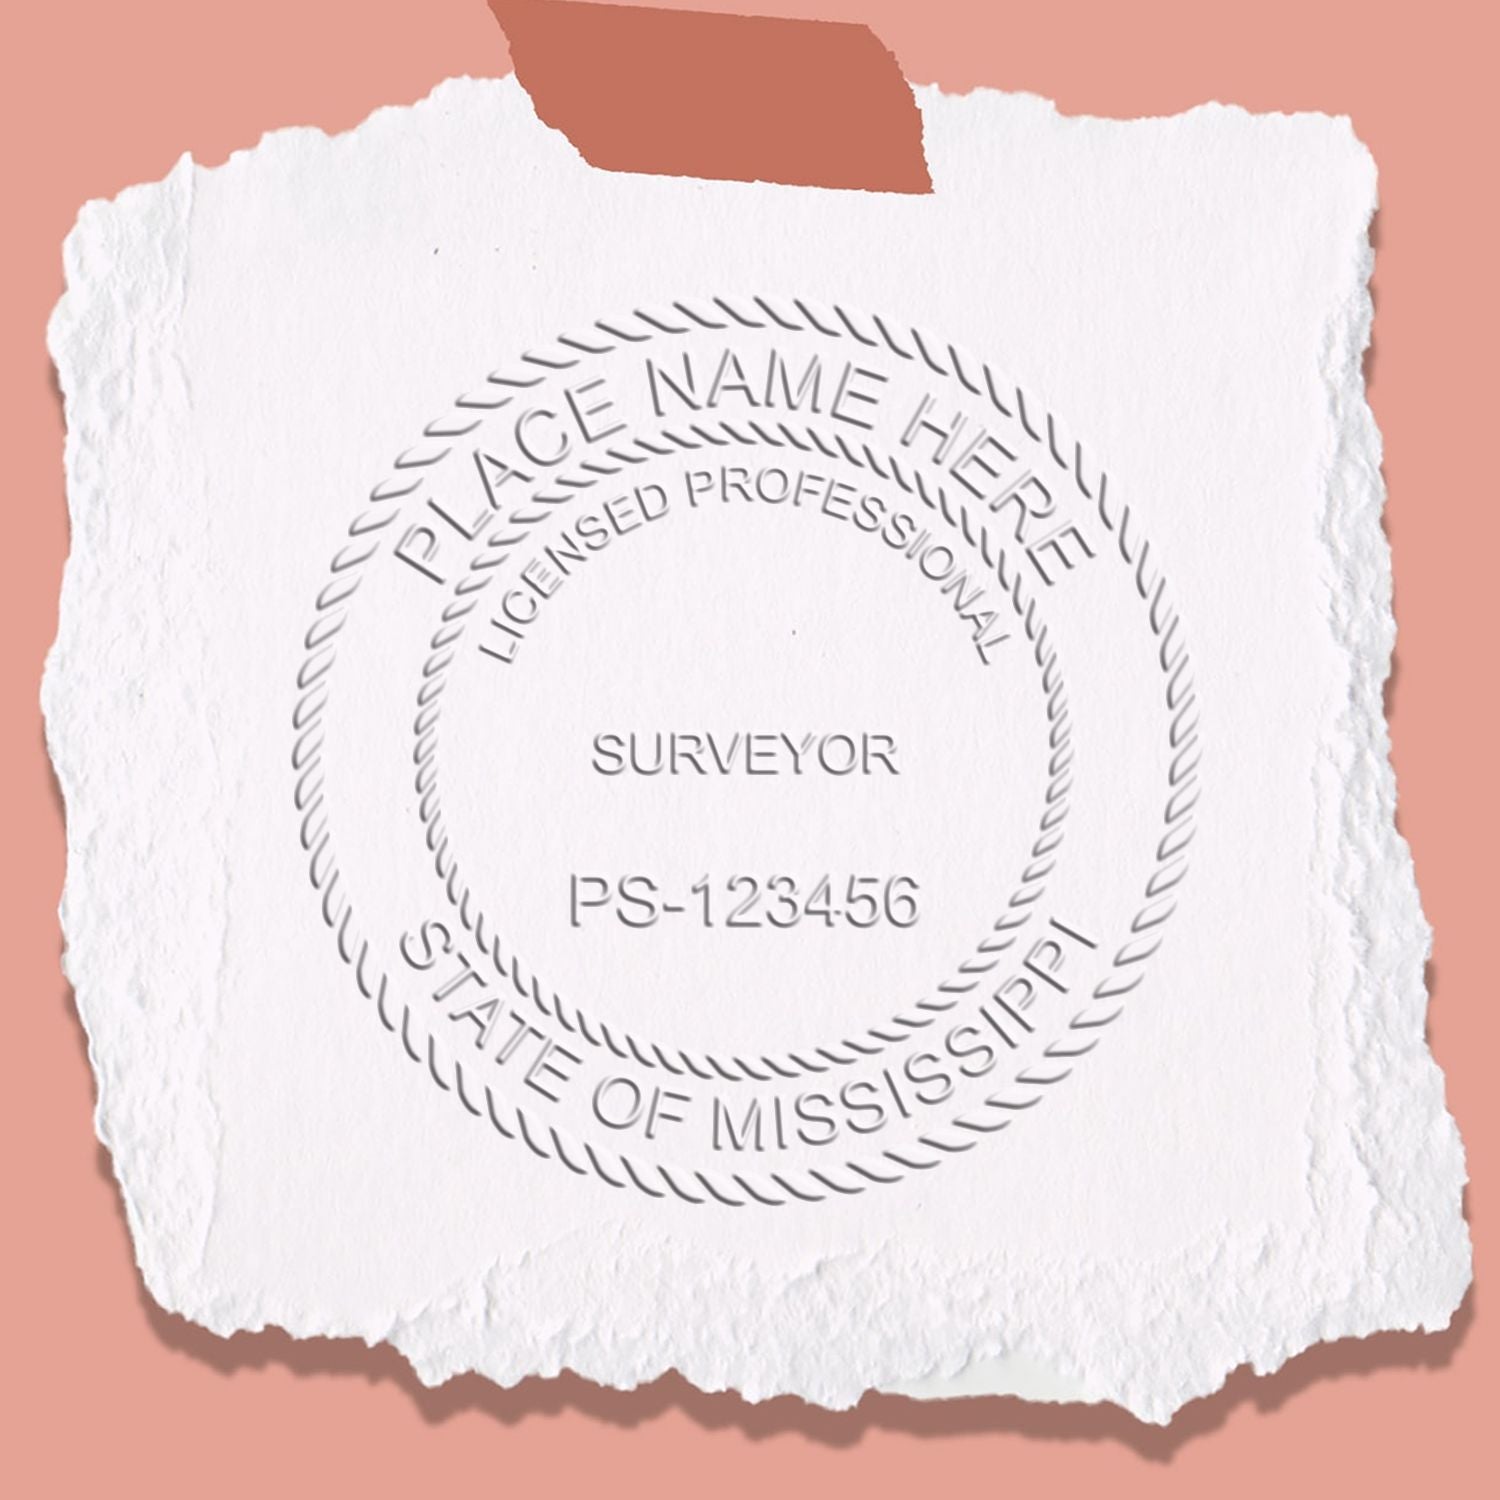 The main image for the Mississippi Desk Surveyor Seal Embosser depicting a sample of the imprint and electronic files